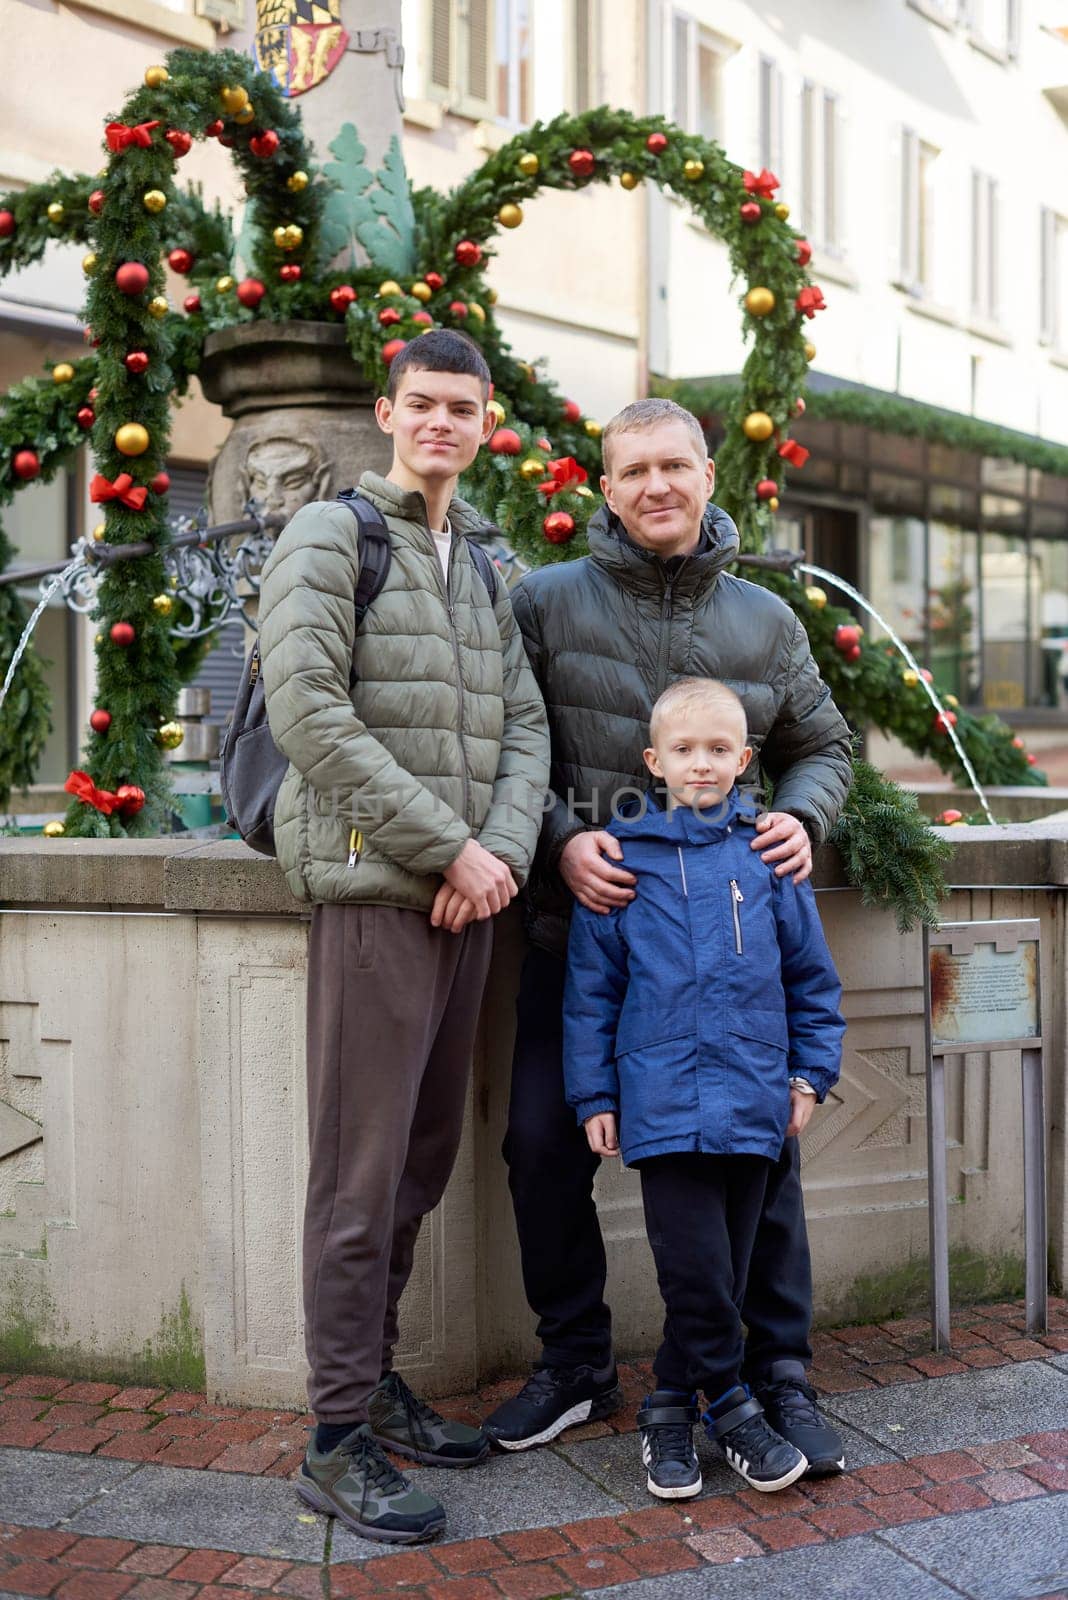 Joyful Family Portrait: Father and Two Sons by Festive Vintage Fountain. by Andrii_Ko